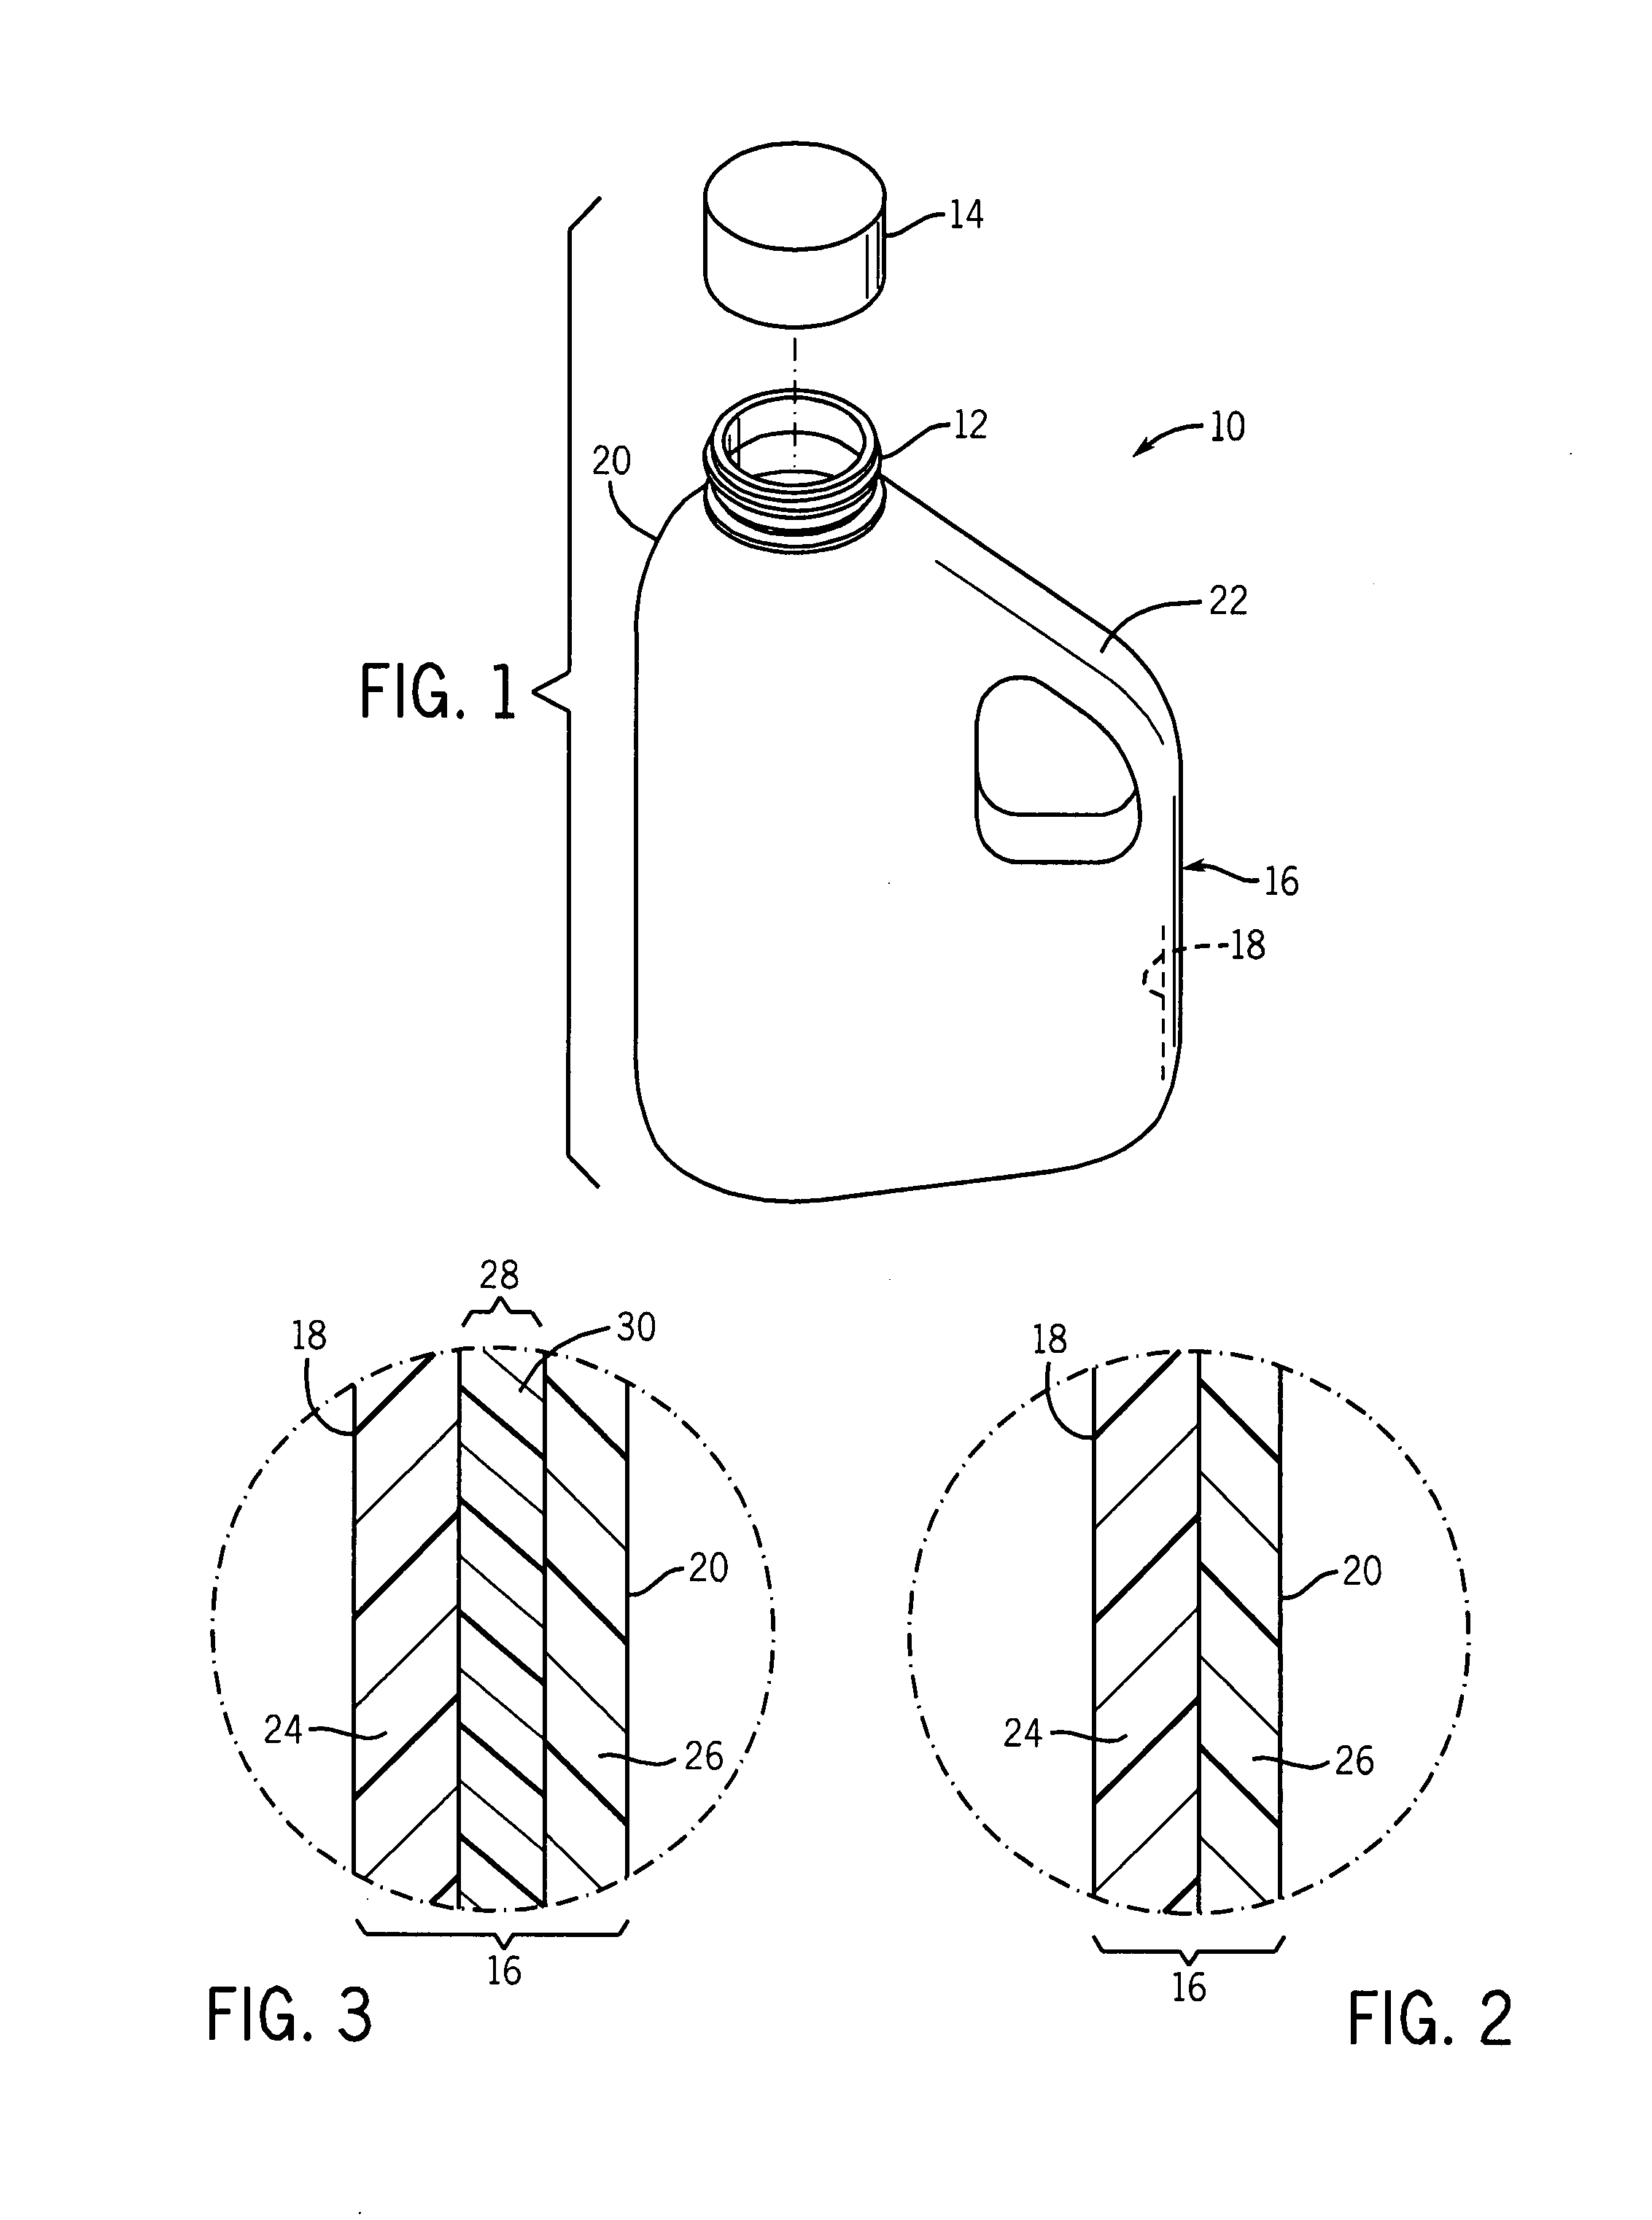 System and method for creating high gloss plastic items via the use of styrenic copolymers as a coextruded layer